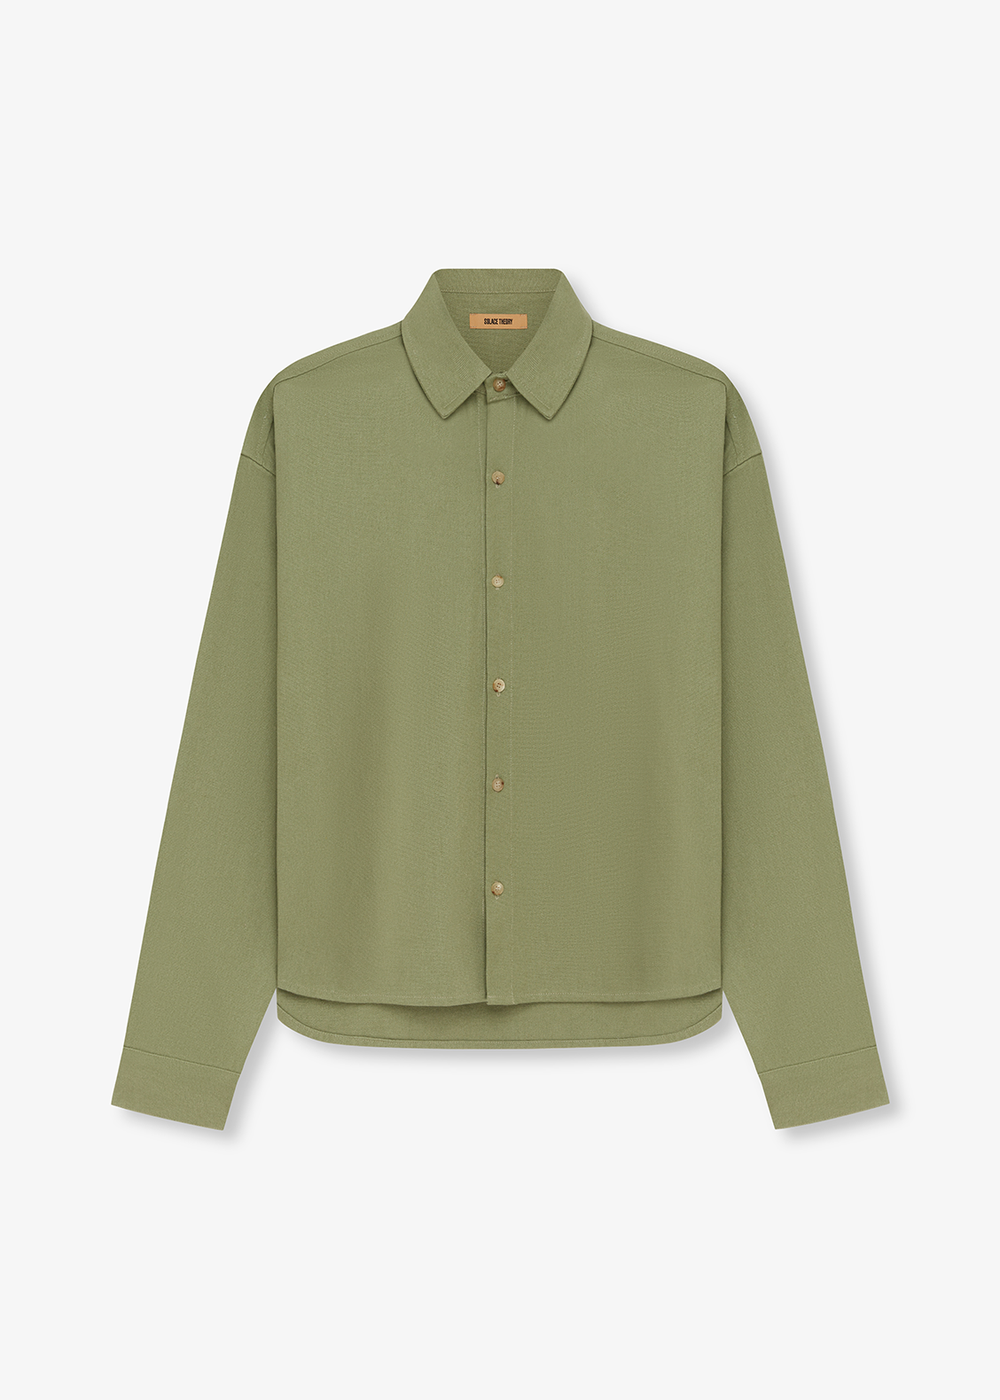 Solace Theory - Cotton Canvas Shirt / Militia | SOLACE THEORY | Mad About The Boy